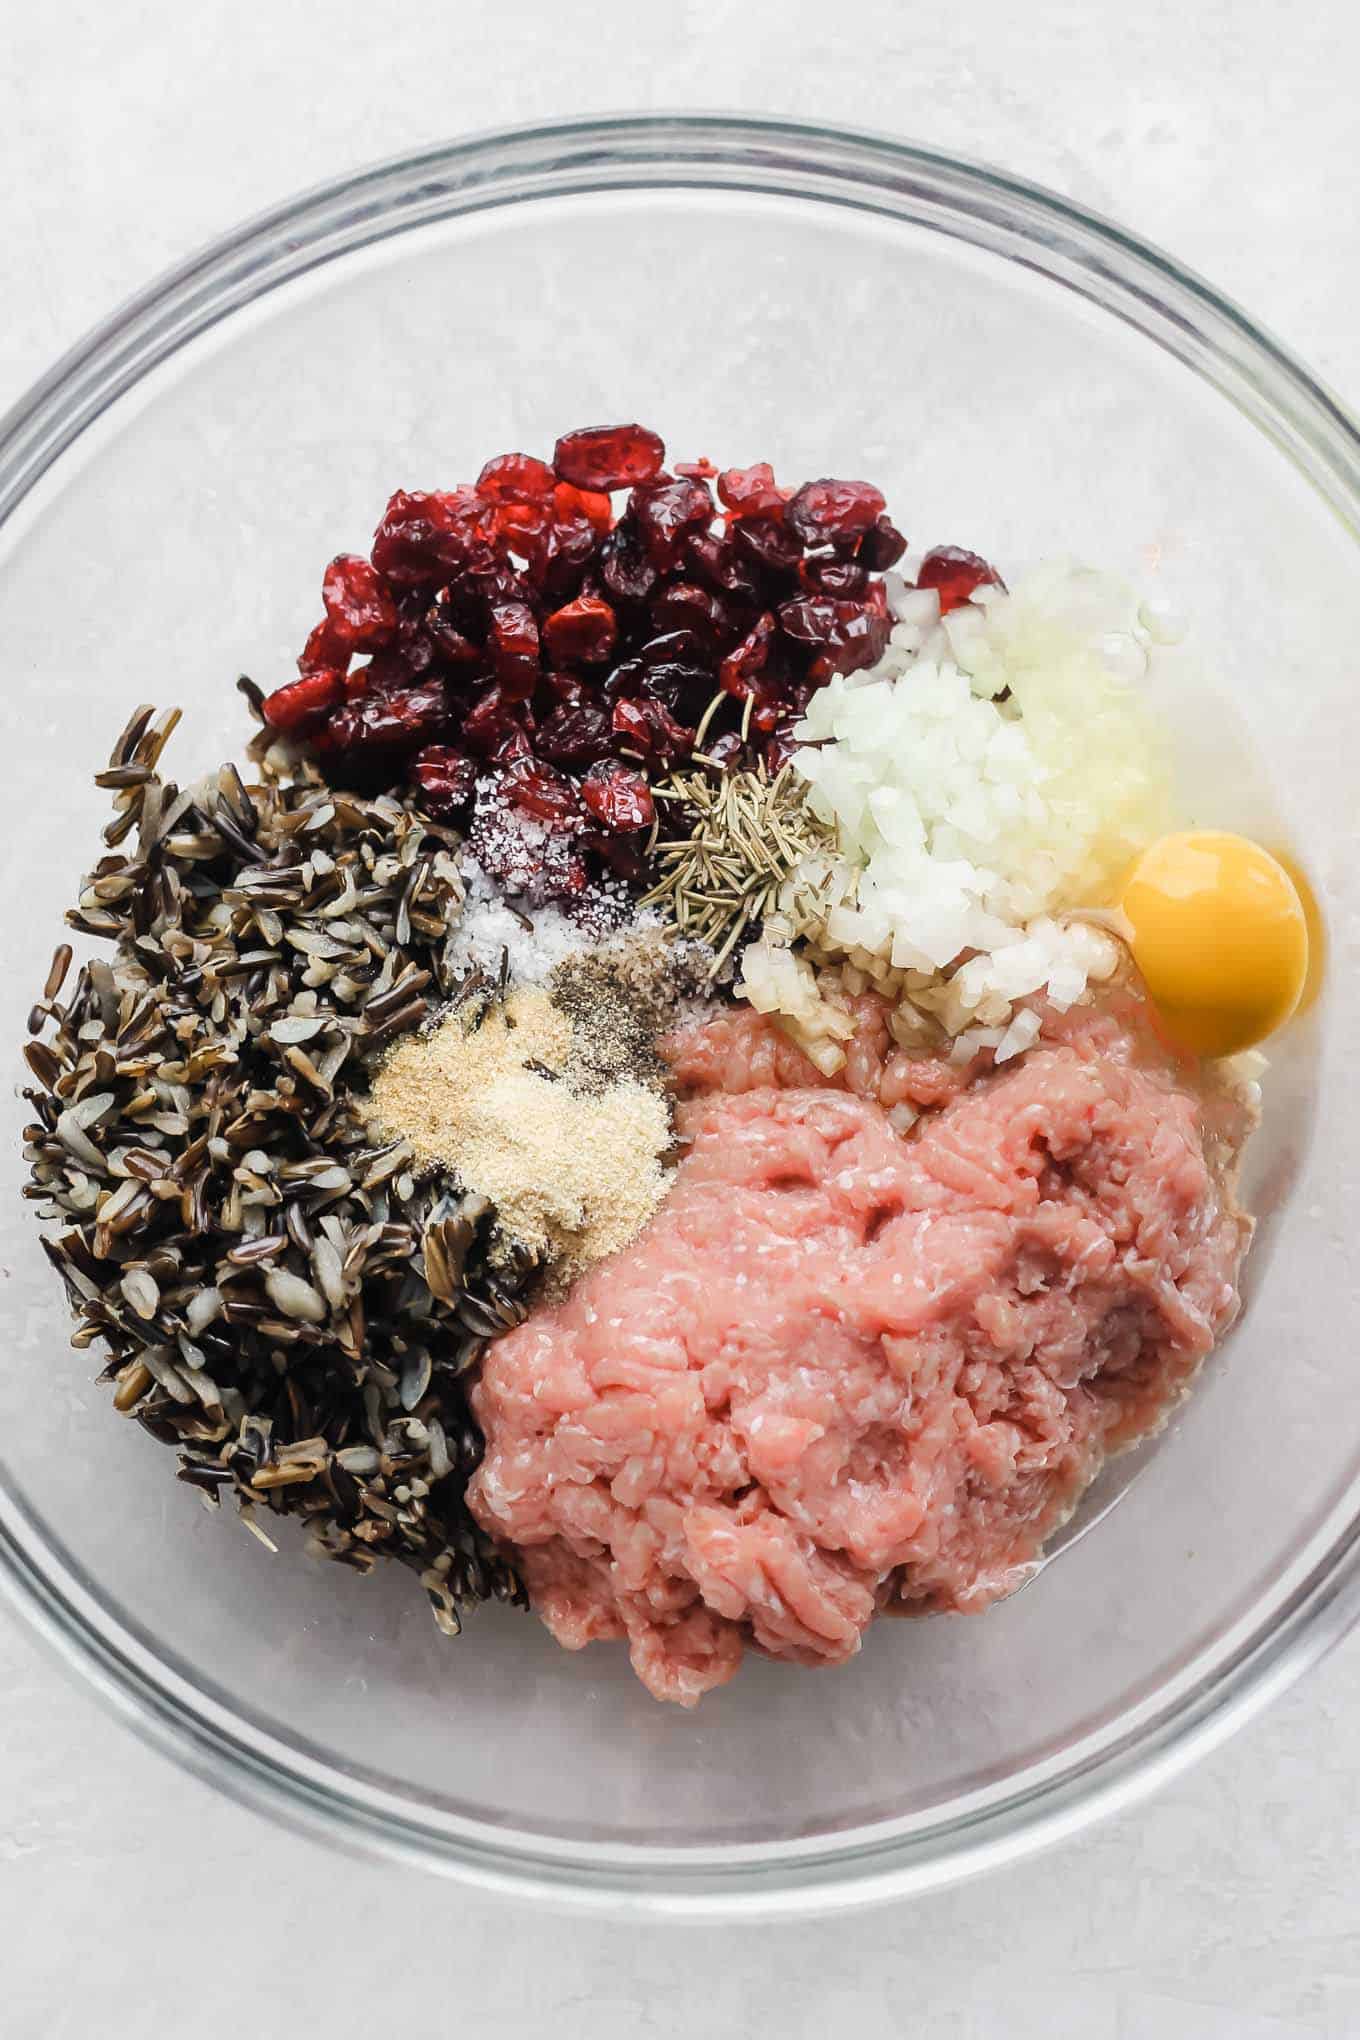 Raw ground turkey, wild rice, cranberries, and seasonings in a bowl before mixing